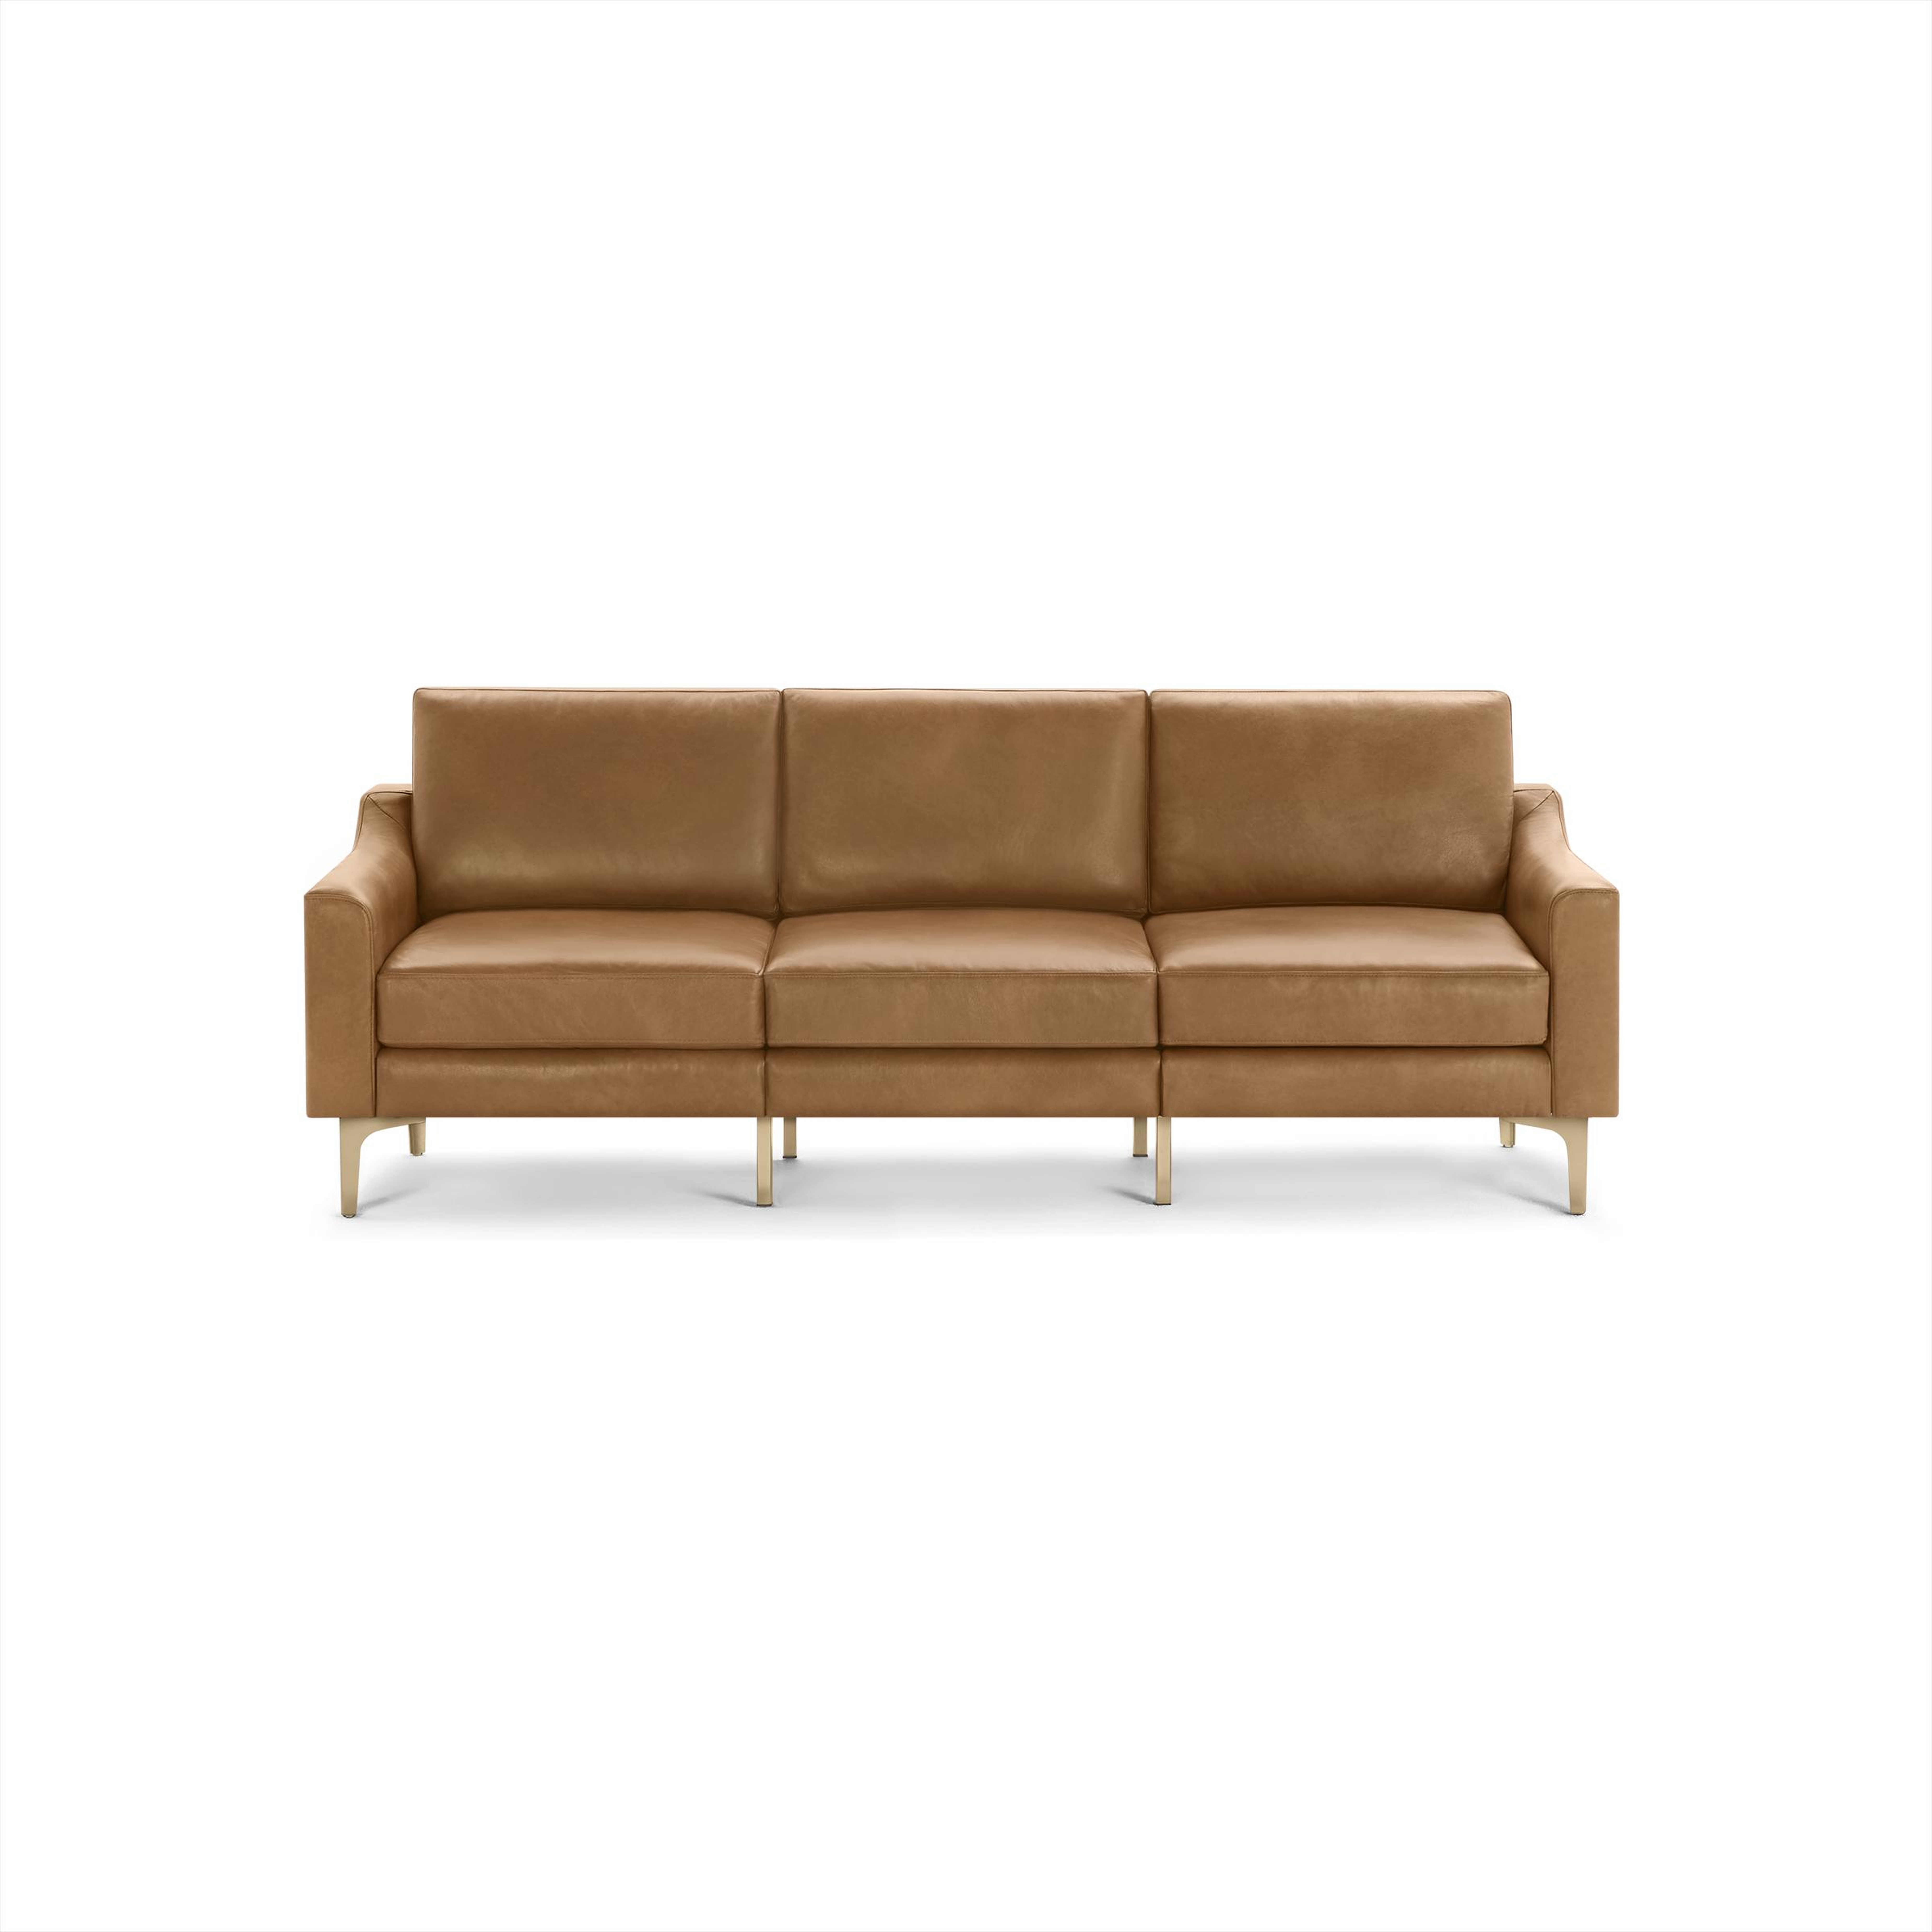 Nomad Leather Sofa in Camel, Brass Legs - Burrow